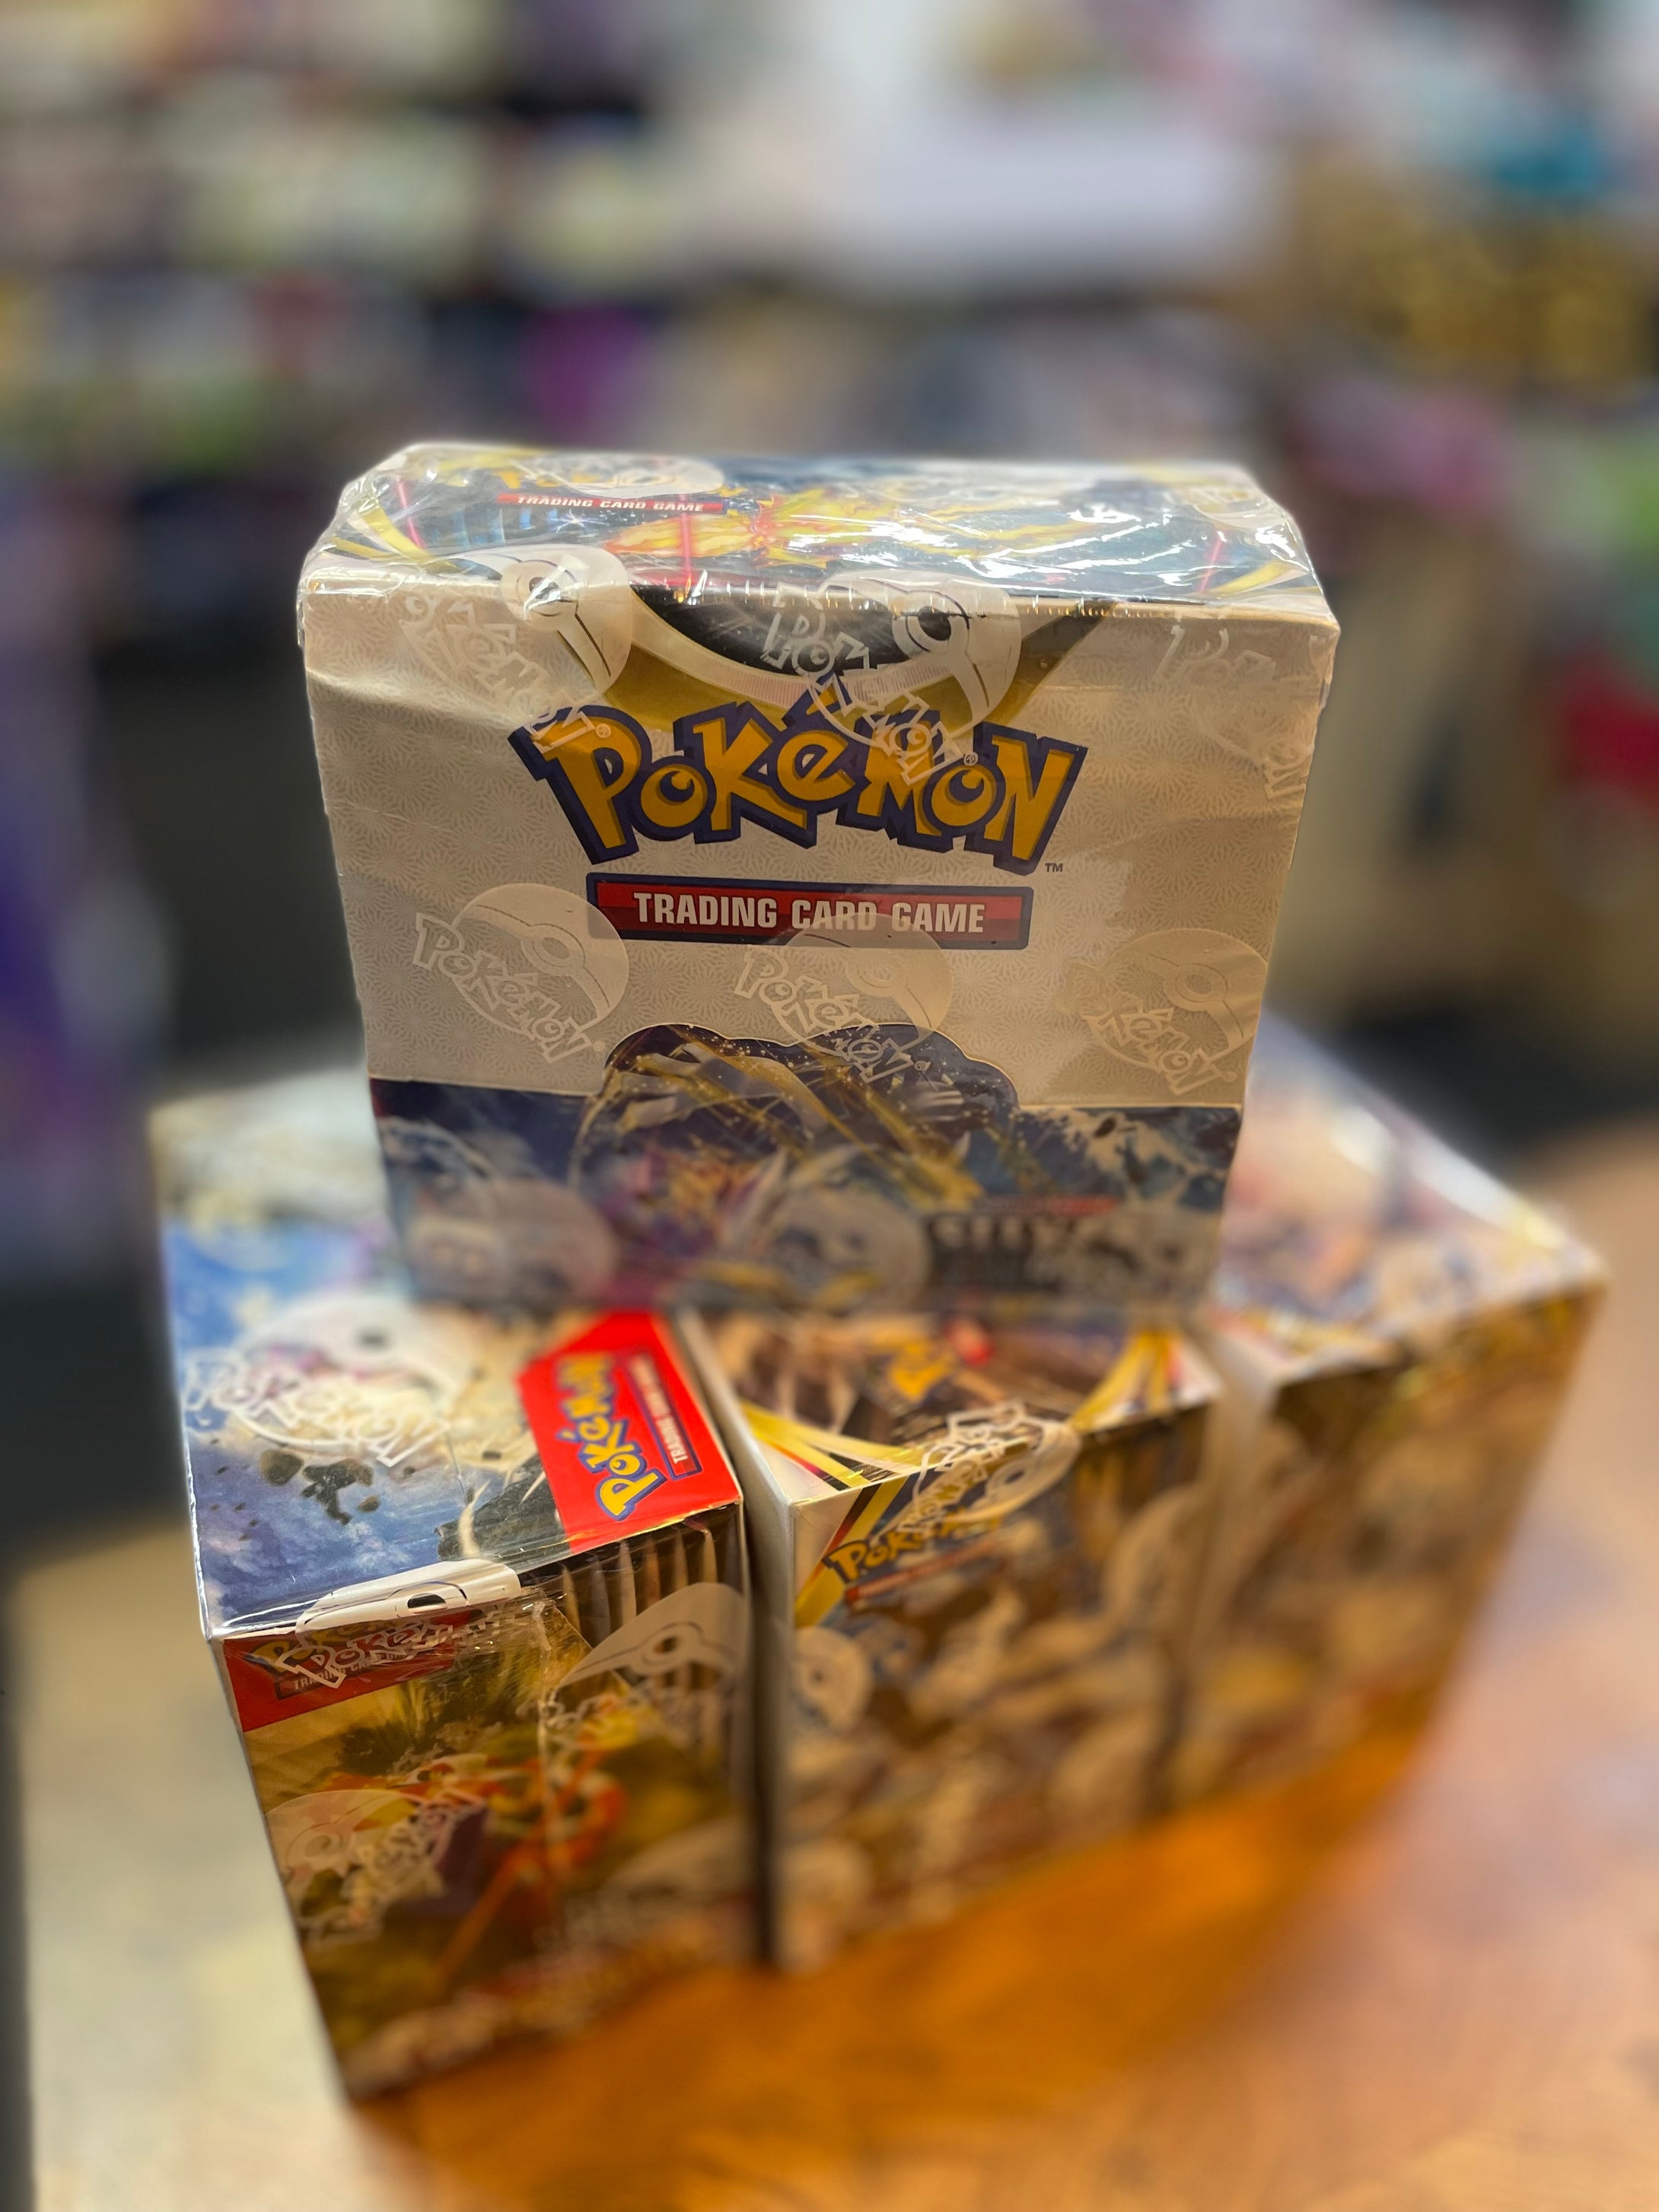 Full Factory Sealed carton of 36 Pokemon Astral Radiance  Booster Packs